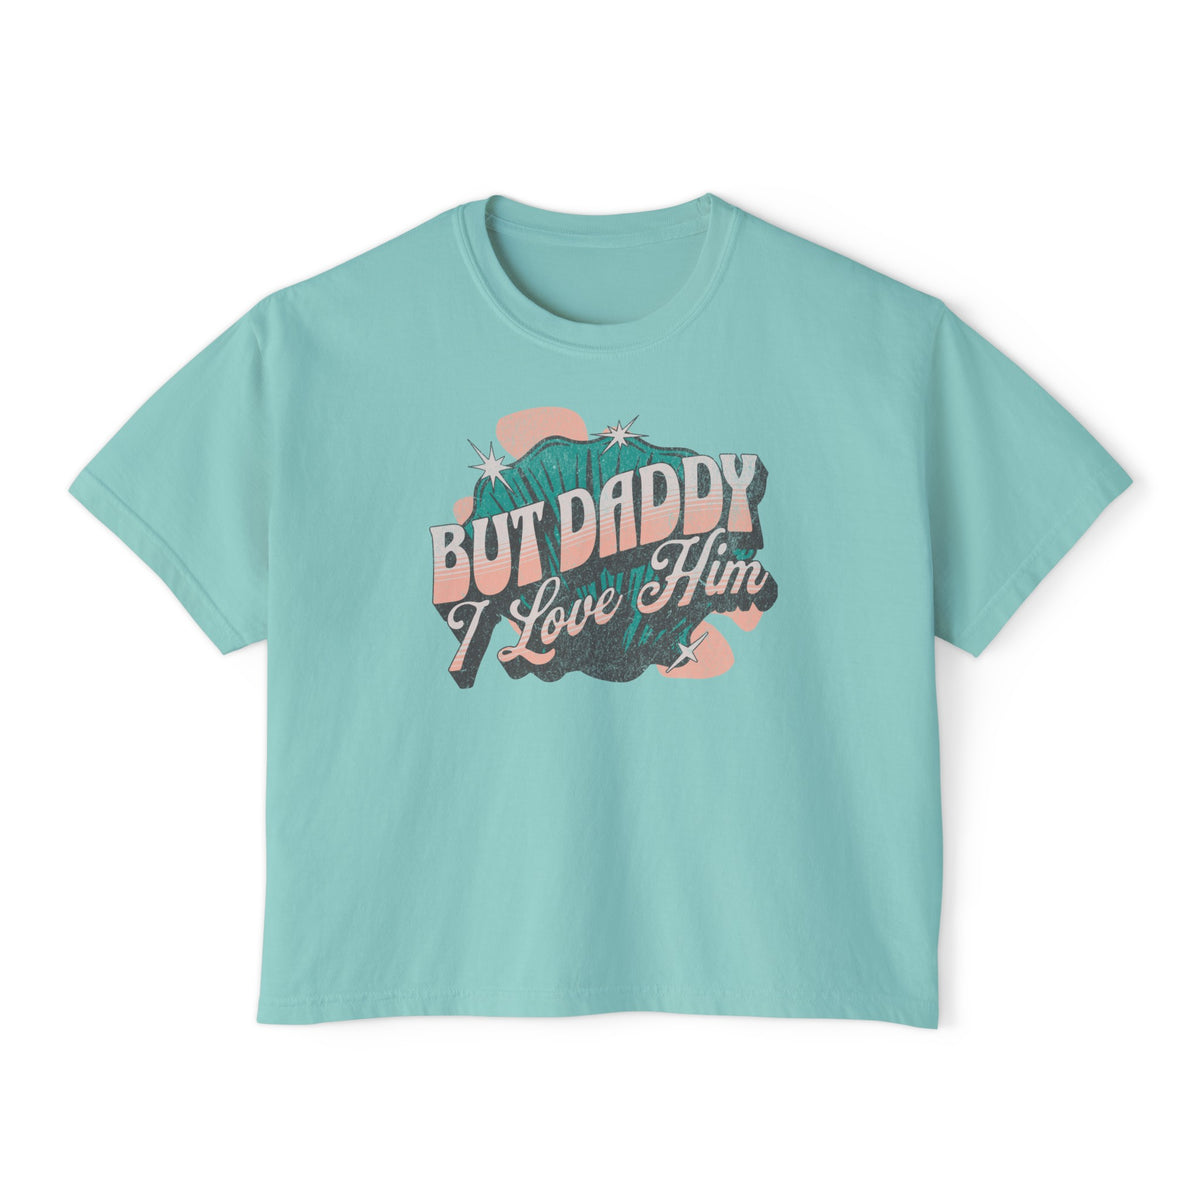 But Daddy I Love Him Comfort Colors Women's Boxy Tee